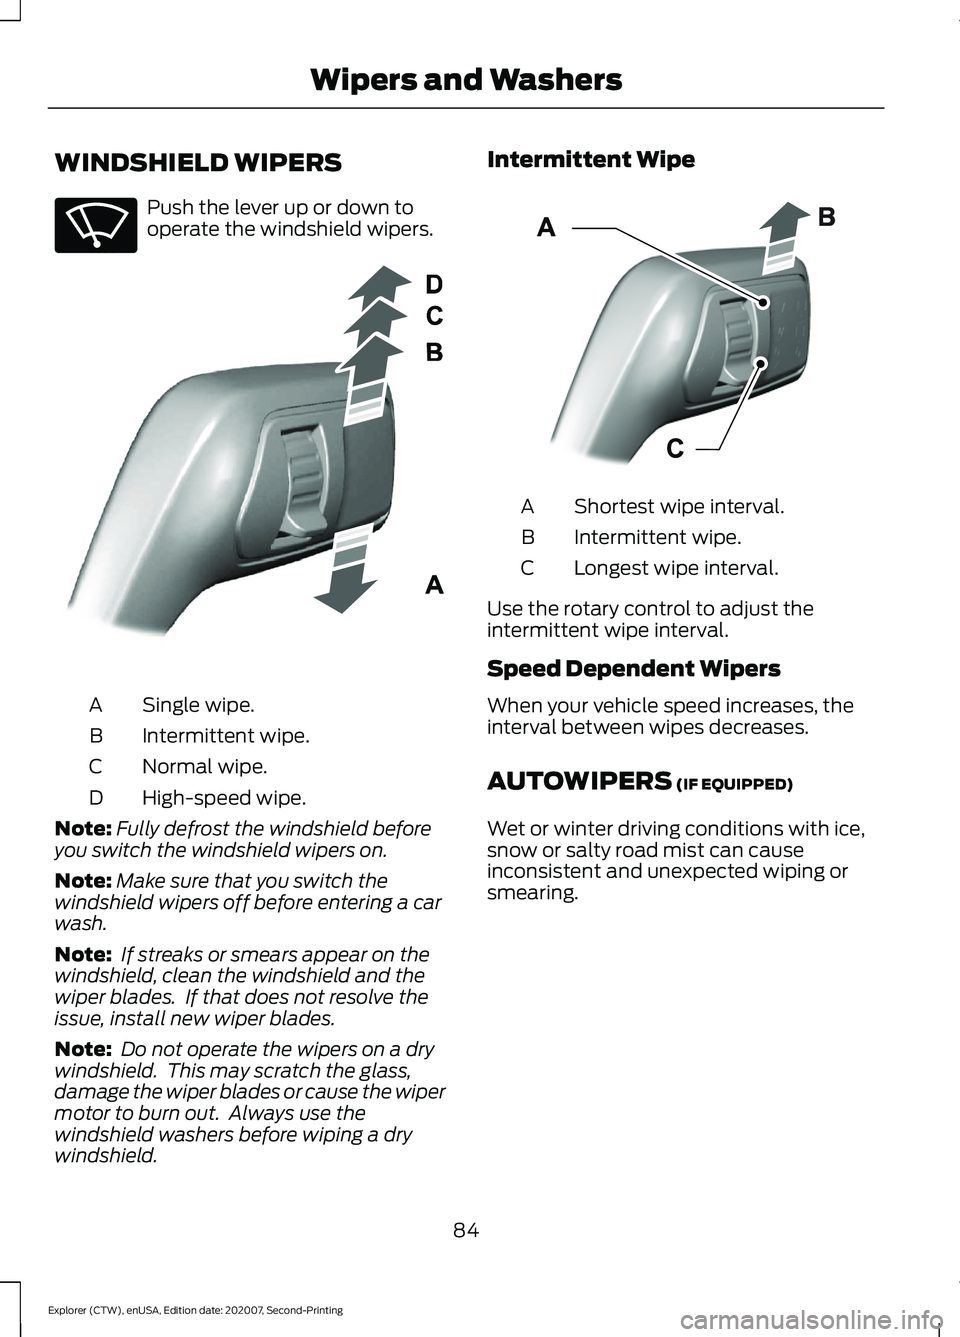 FORD EXPLORER 2021  Owners Manual WINDSHIELD WIPERS
Push the lever up or down to
operate the windshield wipers.
Single wipe.
A
Intermittent wipe.
B
Normal wipe.
C
High-speed wipe.
D
Note: Fully defrost the windshield before
you switch